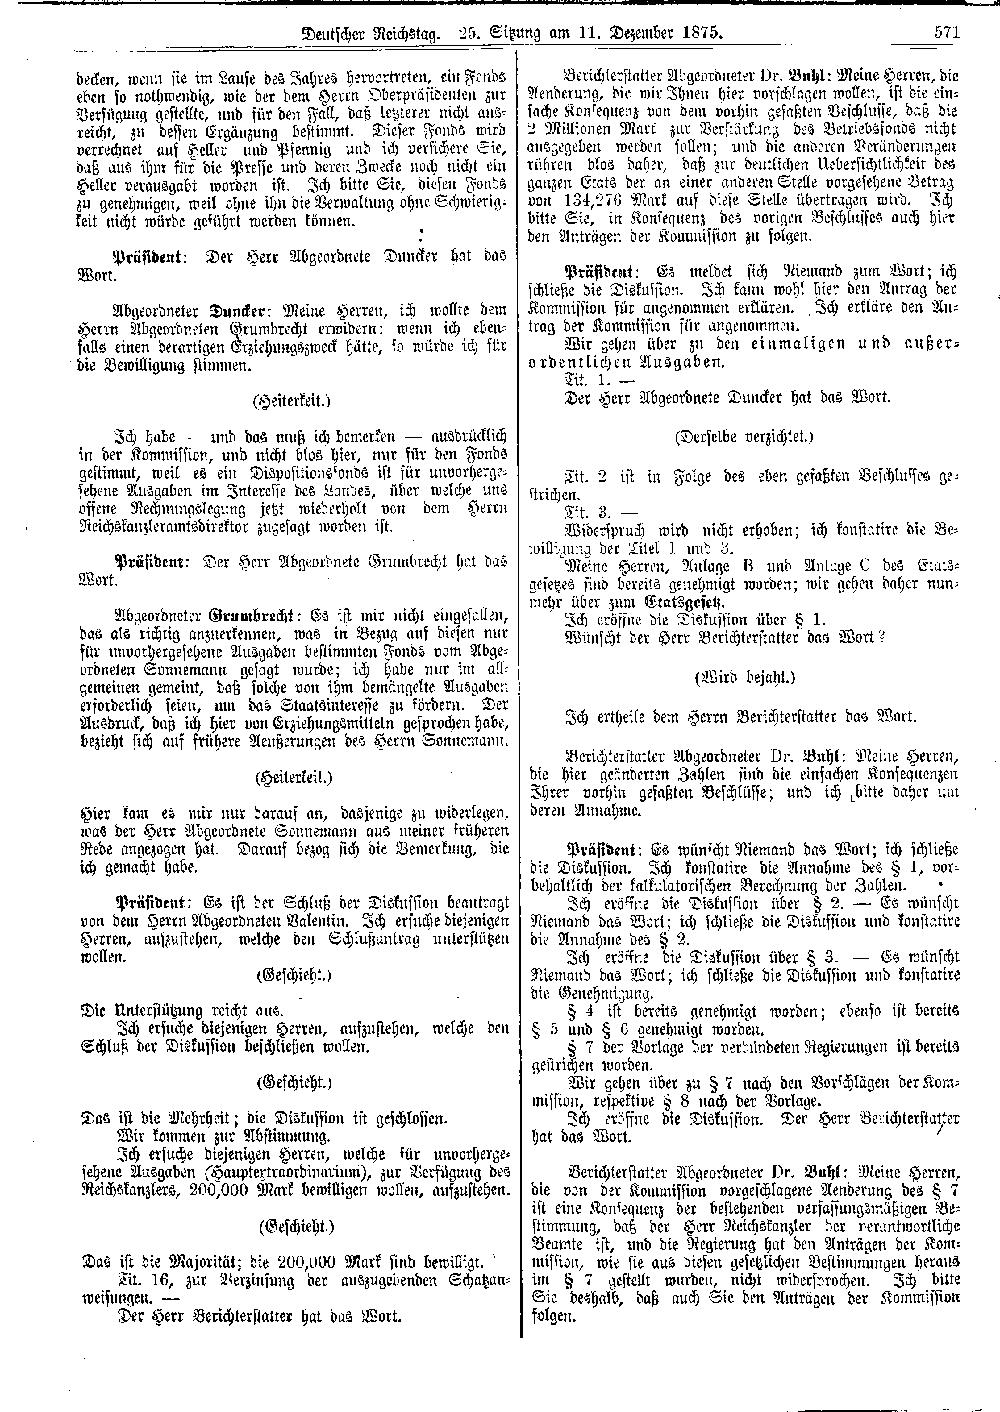 Scan of page 571